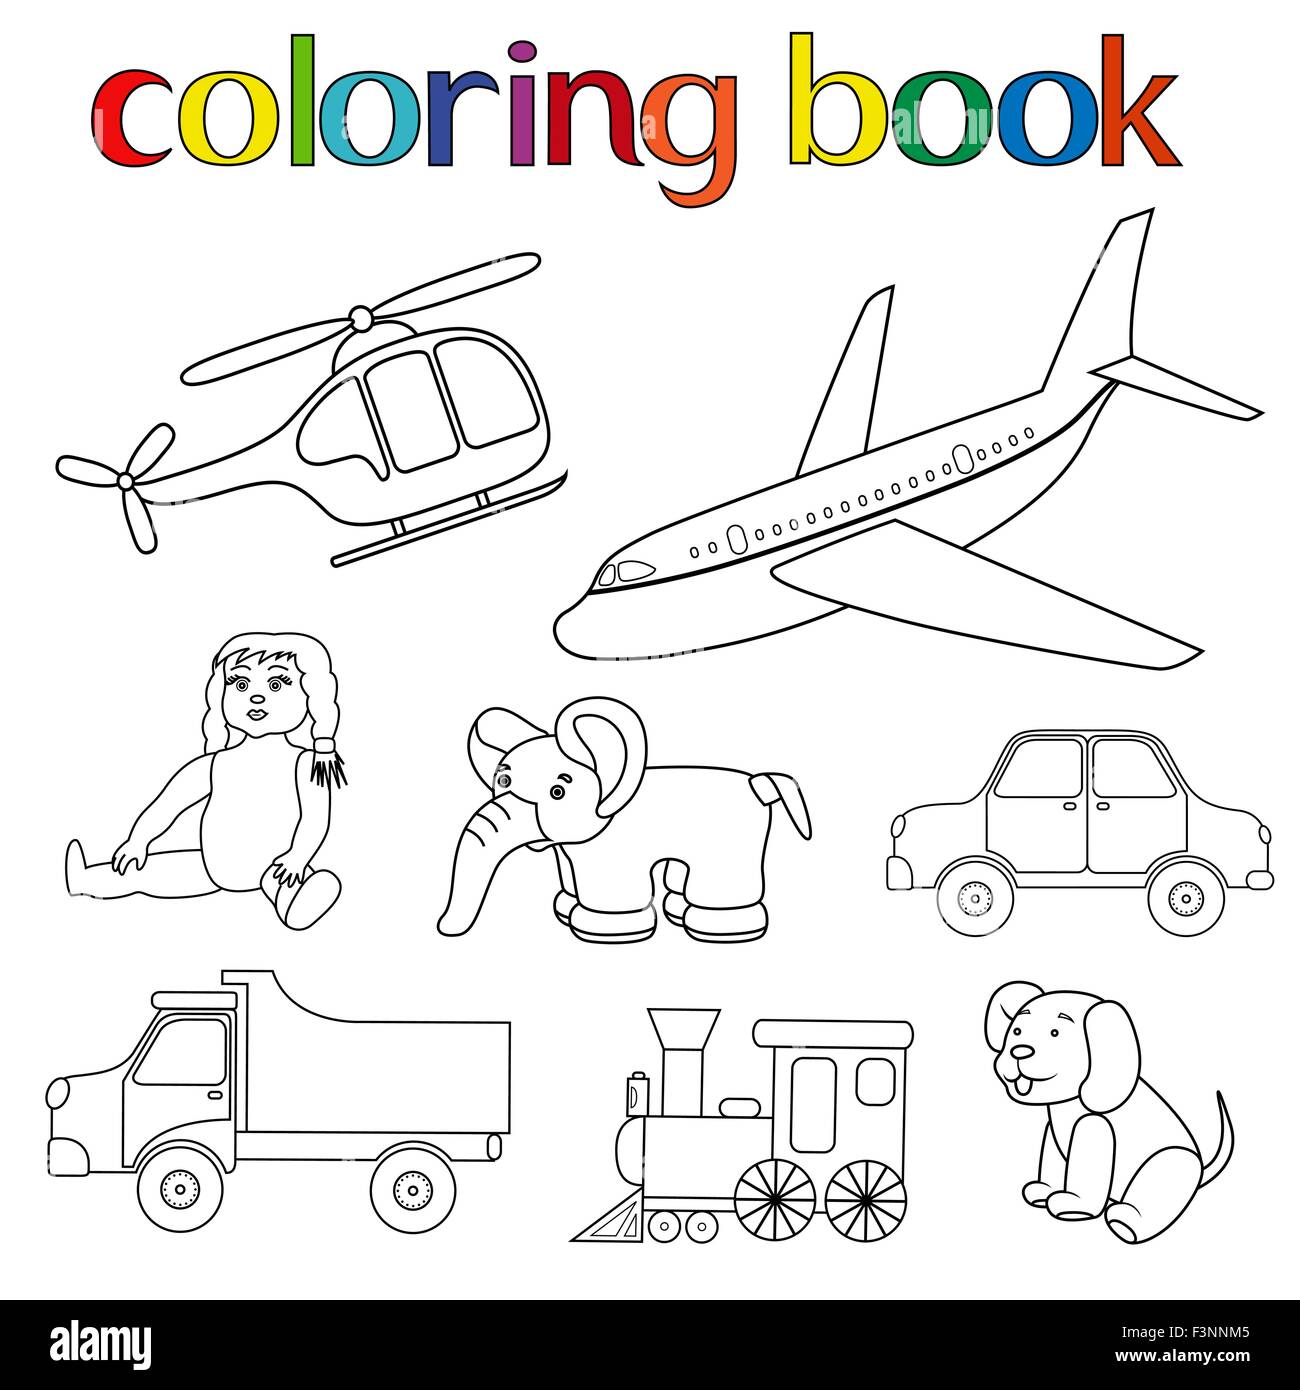 Set of various toys for coloring book with helicopter, airplane ...